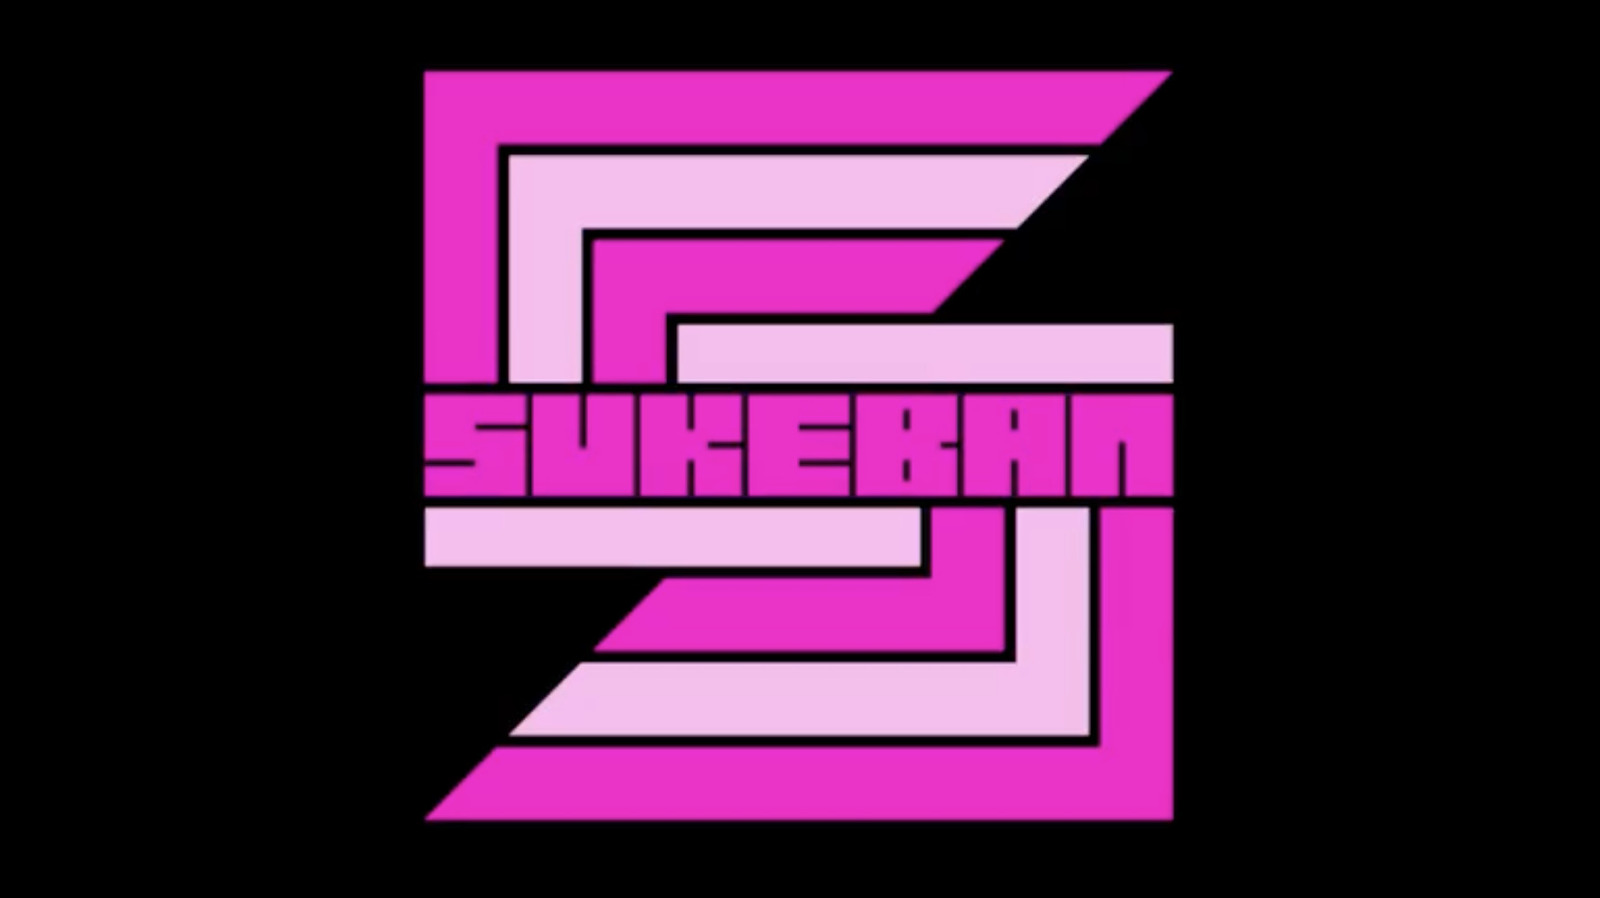 Details about the Sukeban event arriving in NYC this week